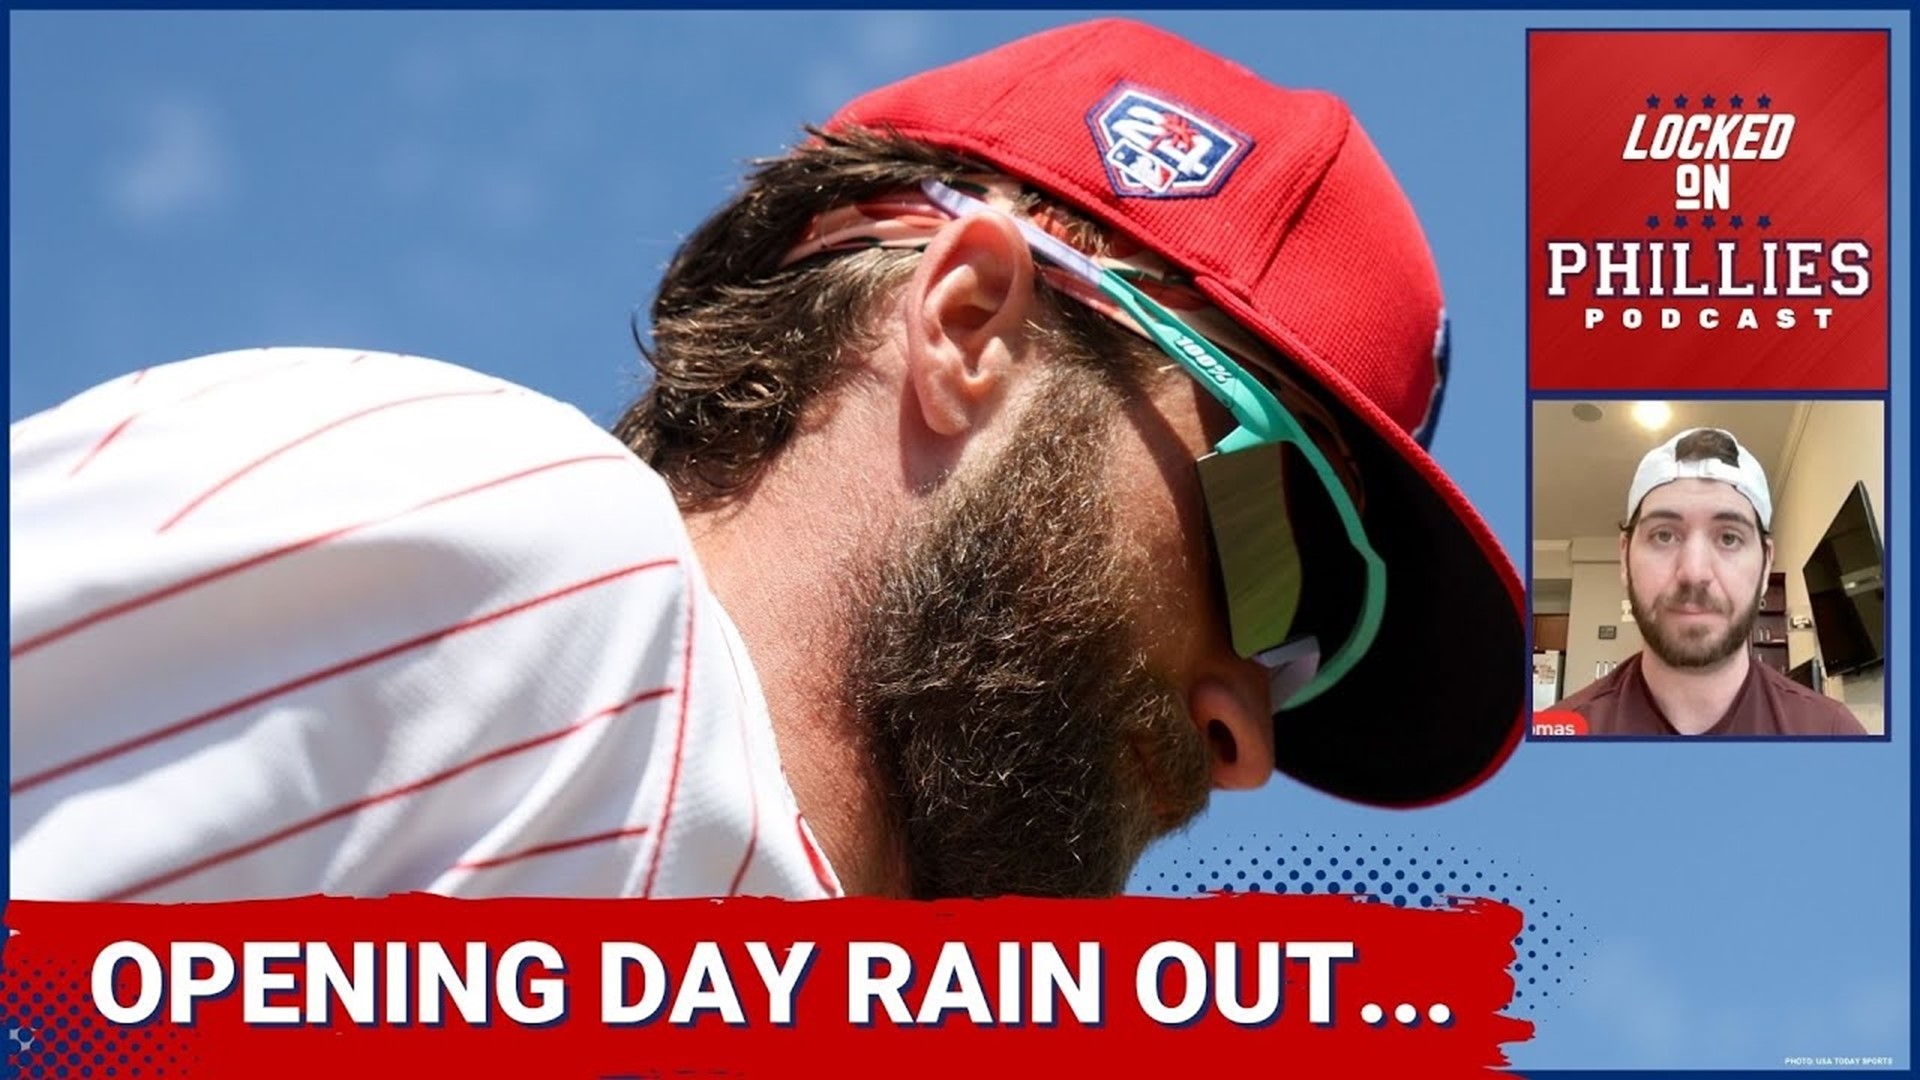 In today's episode, Connor discusses the postponement of the Philadelphia Phillies' Opening Day game against the Atlanta Braves to Friday.